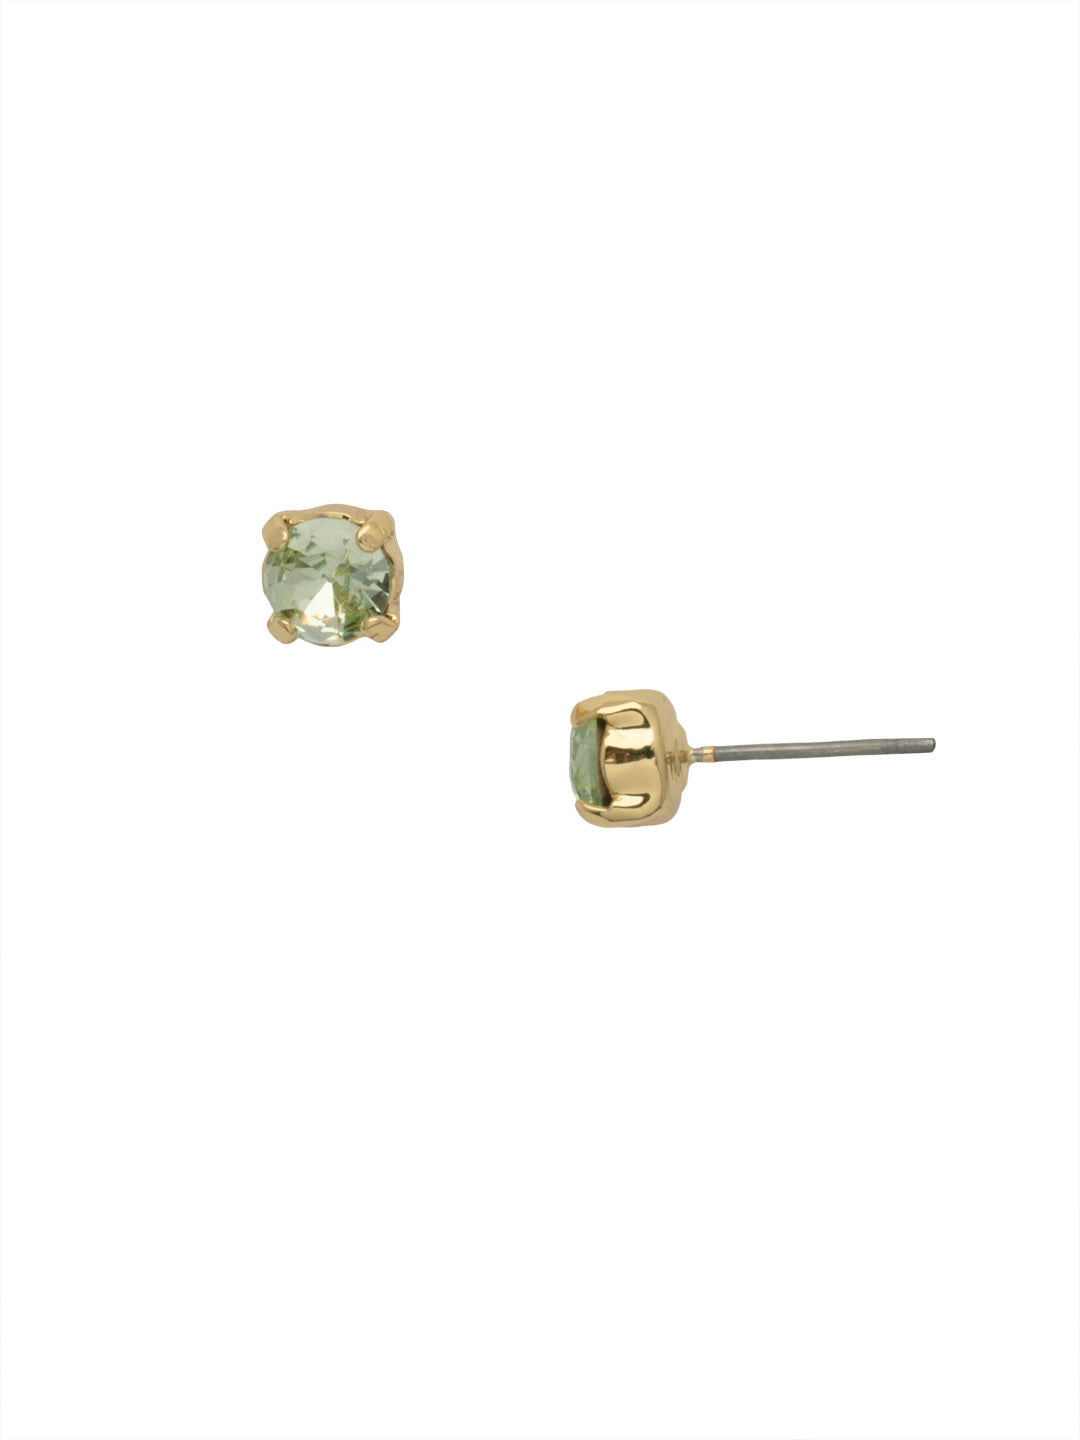 Jayda Stud Earrings - EDN32BGSGR - <p>The Jayda Stud Earrings are the perfect every day wardrobe staple. A round crystal nestles perfectly in a metal plated post with four prongs. </p><p>Need help picking a stud? <a href="https://www.sorrelli.com/blogs/sisterhood/round-stud-earrings-101-a-rundown-of-sizes-styles-and-sparkle">Check out our size guide!</a> From Sorrelli's Sage Green collection in our Bright Gold-tone finish.</p>